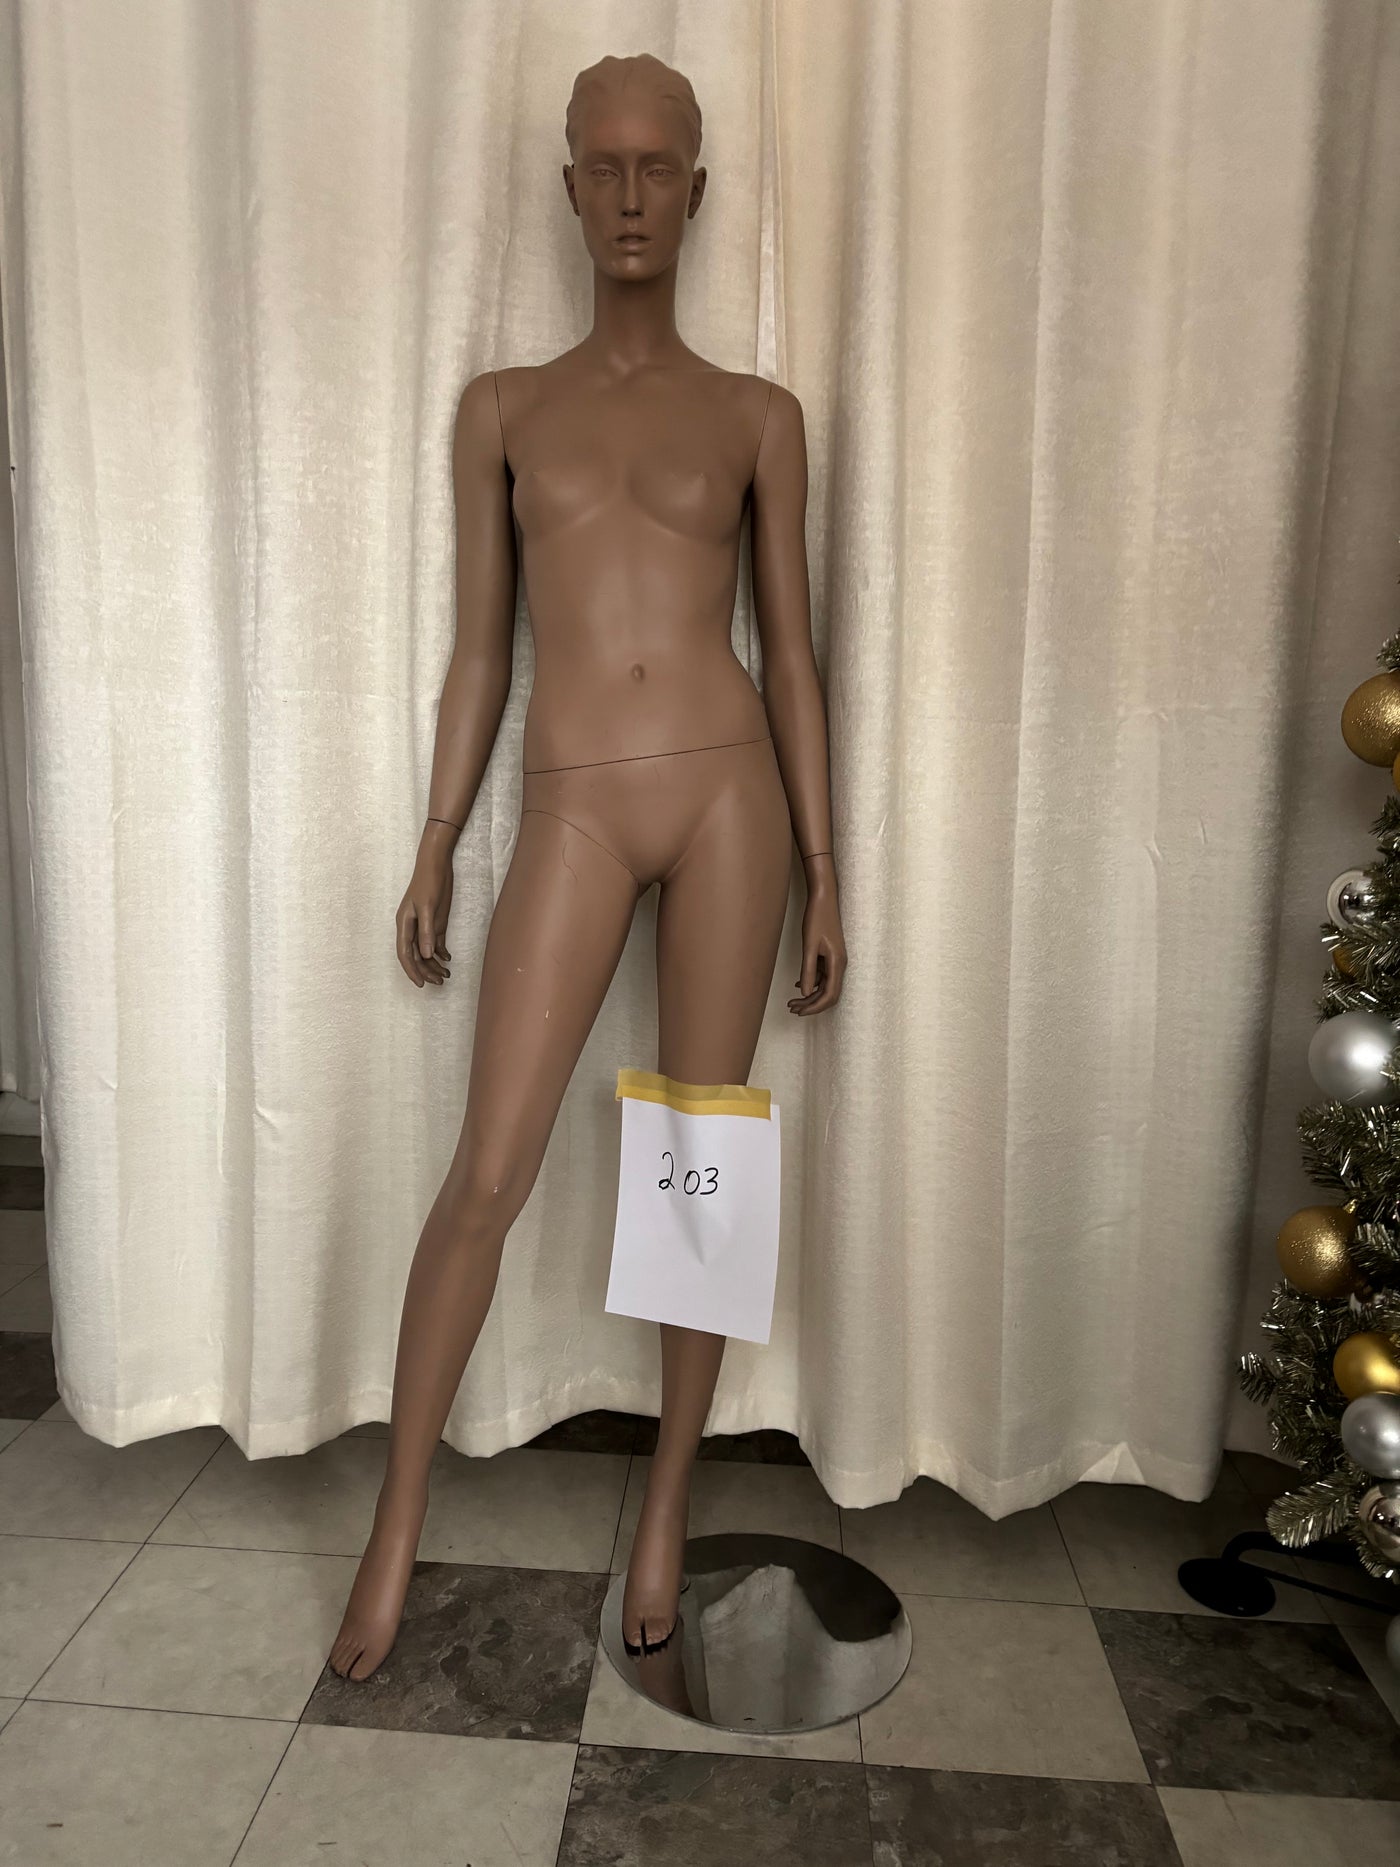 Used Female Adel Rootstein Mannequin #203